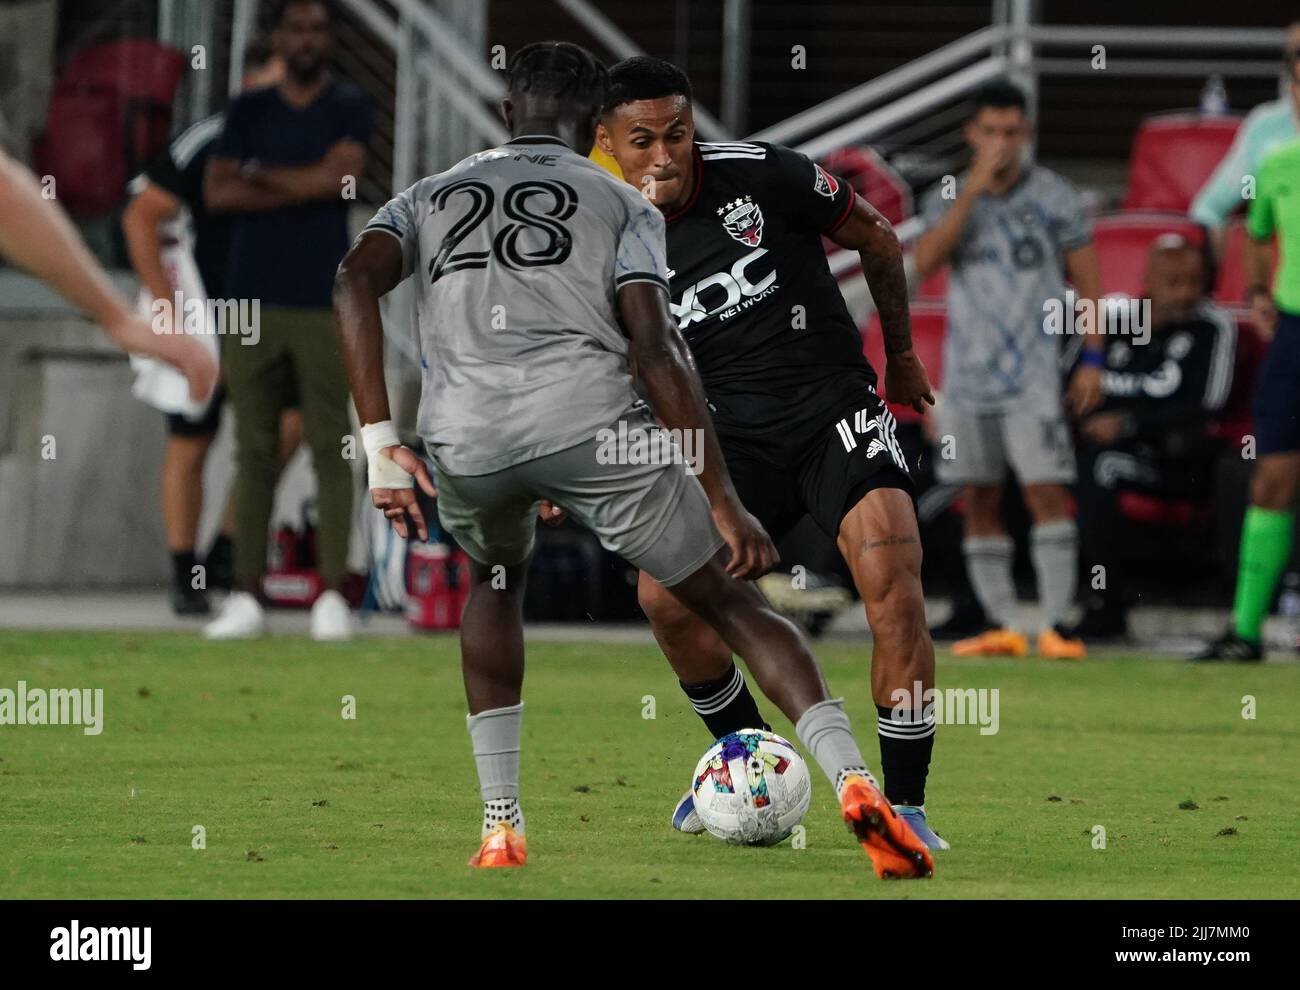 WASHINGTON, DC, USA - 23 JULY 2022: CF Montréal midfielder Ismaël Koné (28) defends against D.C. United midfielder Andy Najar (14) during a MLS match between D.C United and C.F. Montreal, on July 23, 2022, at Audi Field, in Washington, DC. (Photo by Tony Quinn-Alamy Live News) Stock Photo